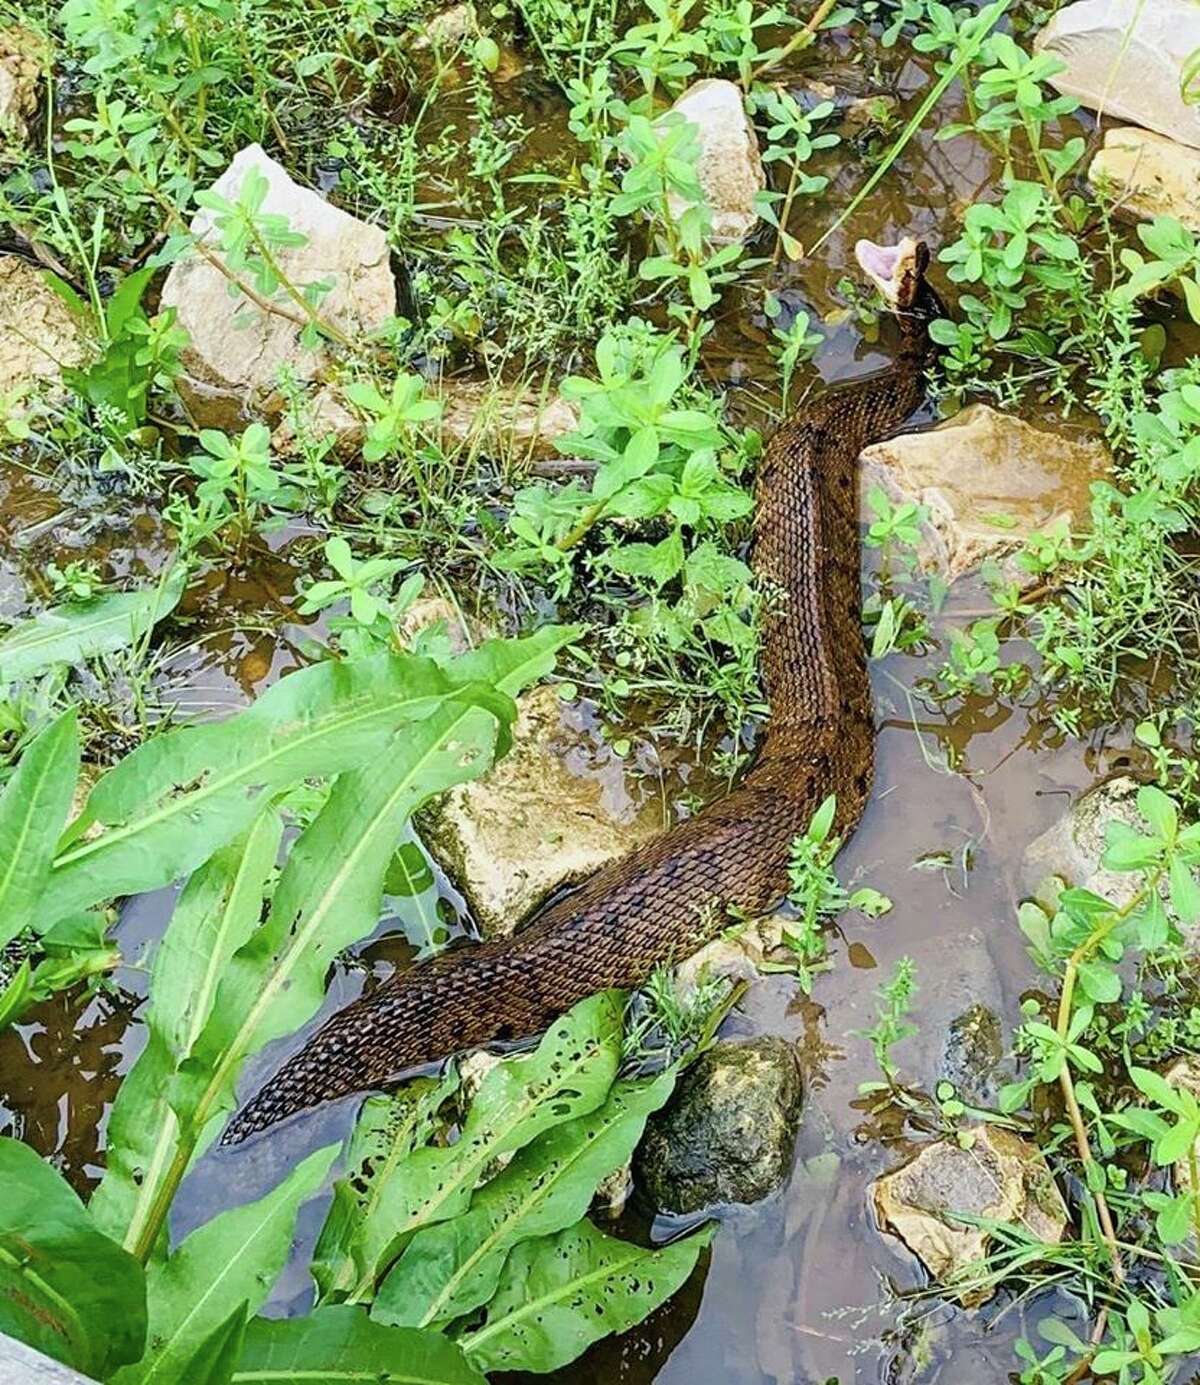 A water moccasin snake was spotted in Katy's Firethorne subdivision.